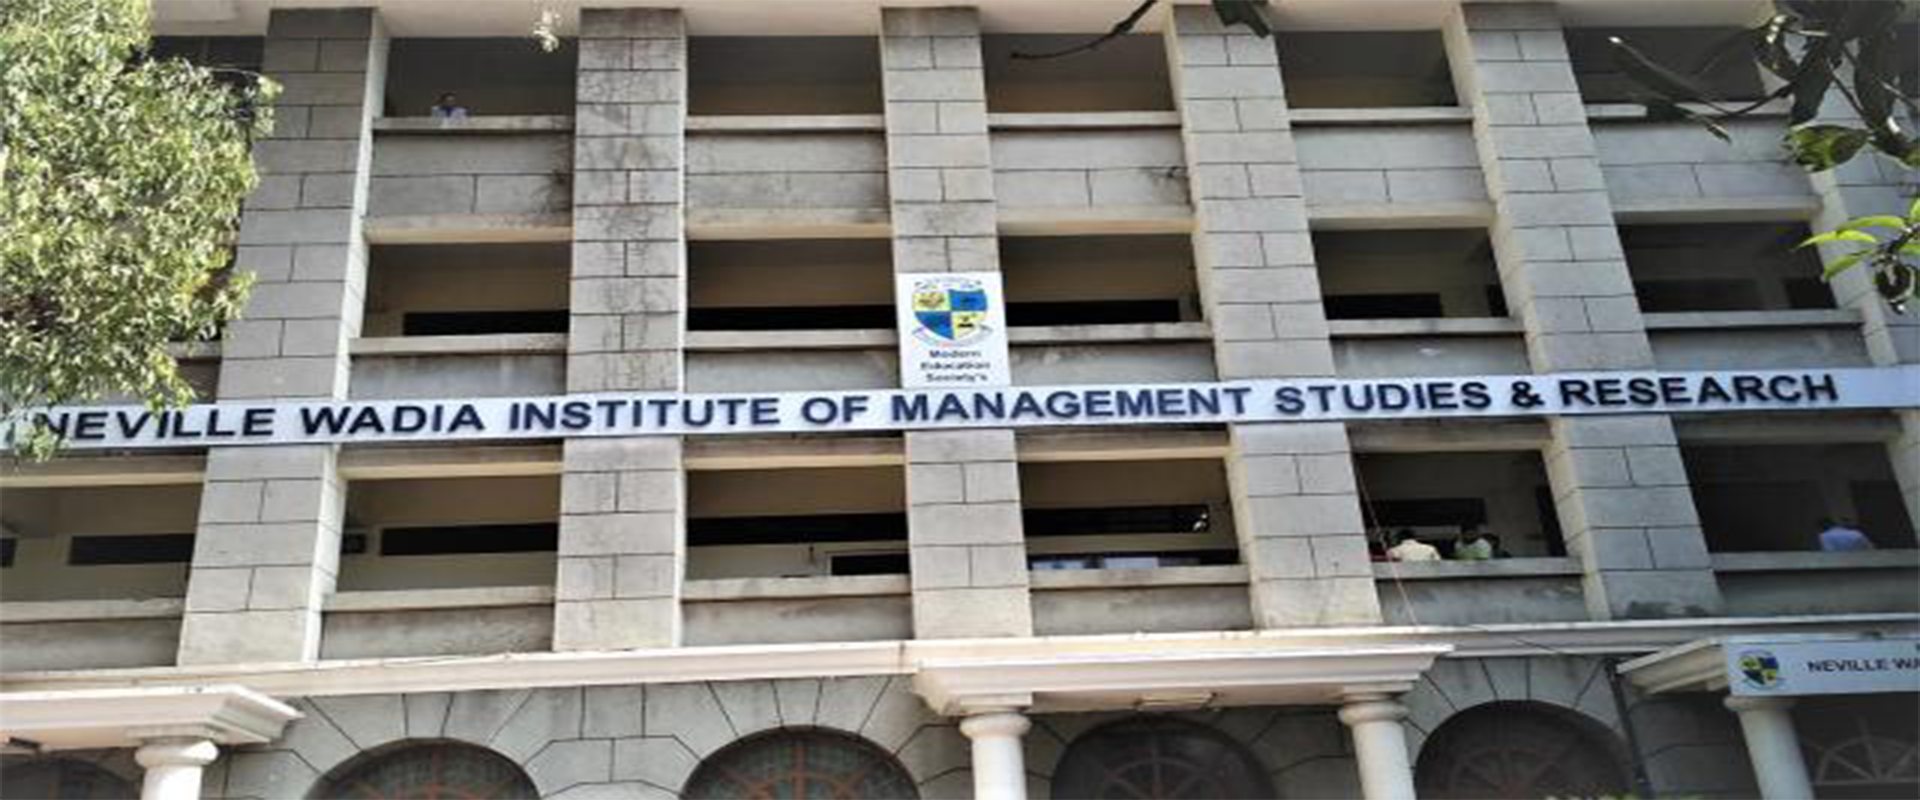 Neville Wadia Institute of management Studies & Research (NWIMSR)